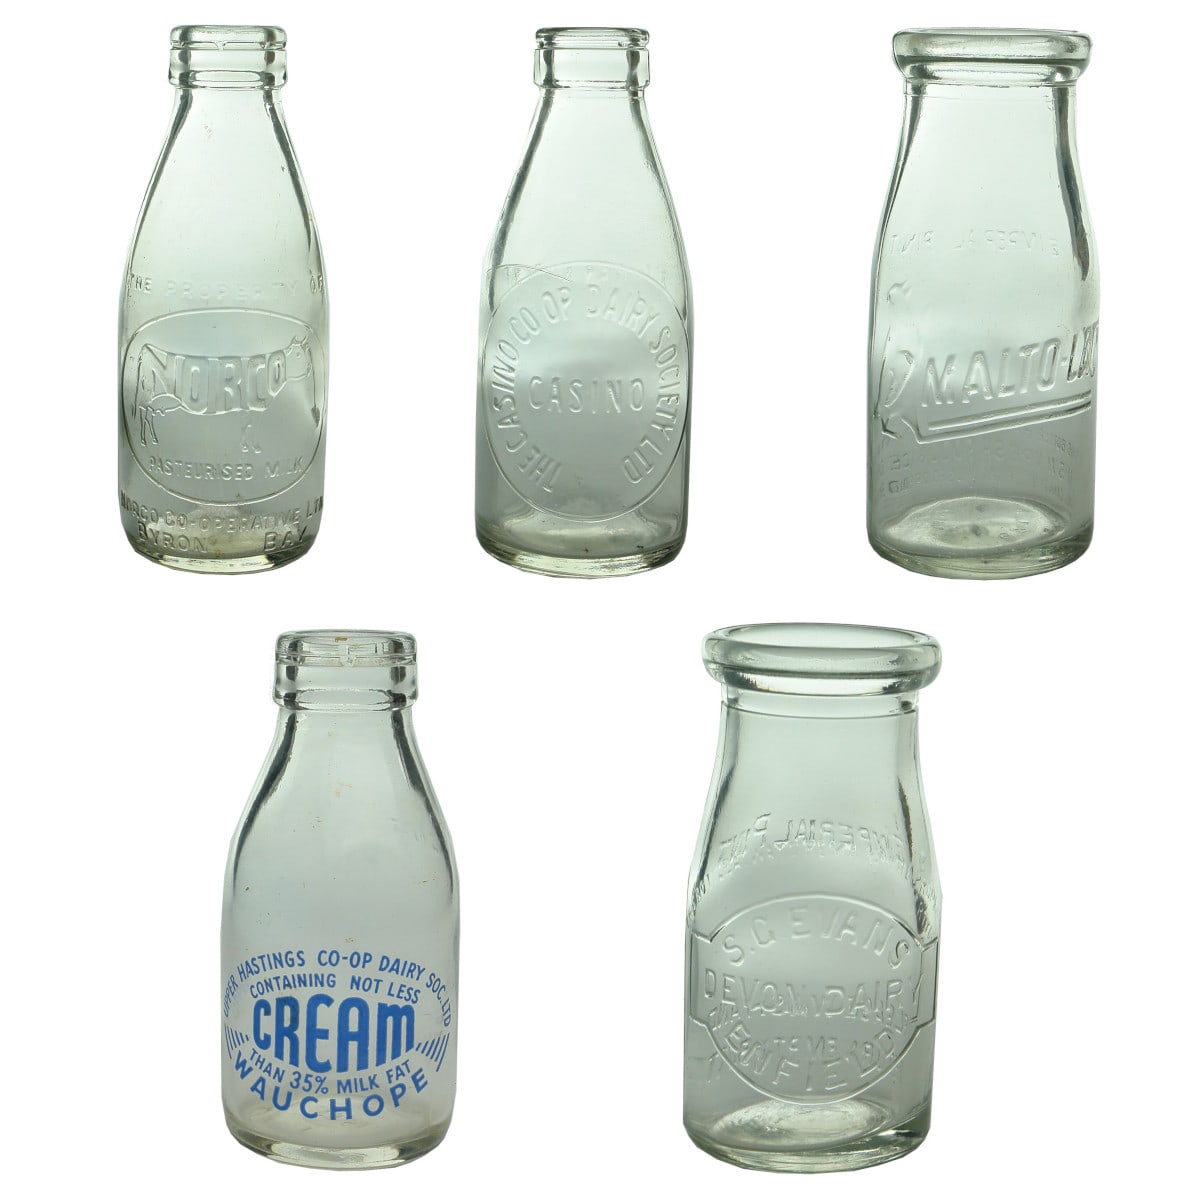 5 Milk & Cream bottles: Norco 1/2 Pint; Casino Dairy 1/2 Pint; Malto-Lac 1/2 Pint; Upper Hastings Wauchope 1/3 Pint; Evons, Enfield 1/4 Pint. (New South Wales)